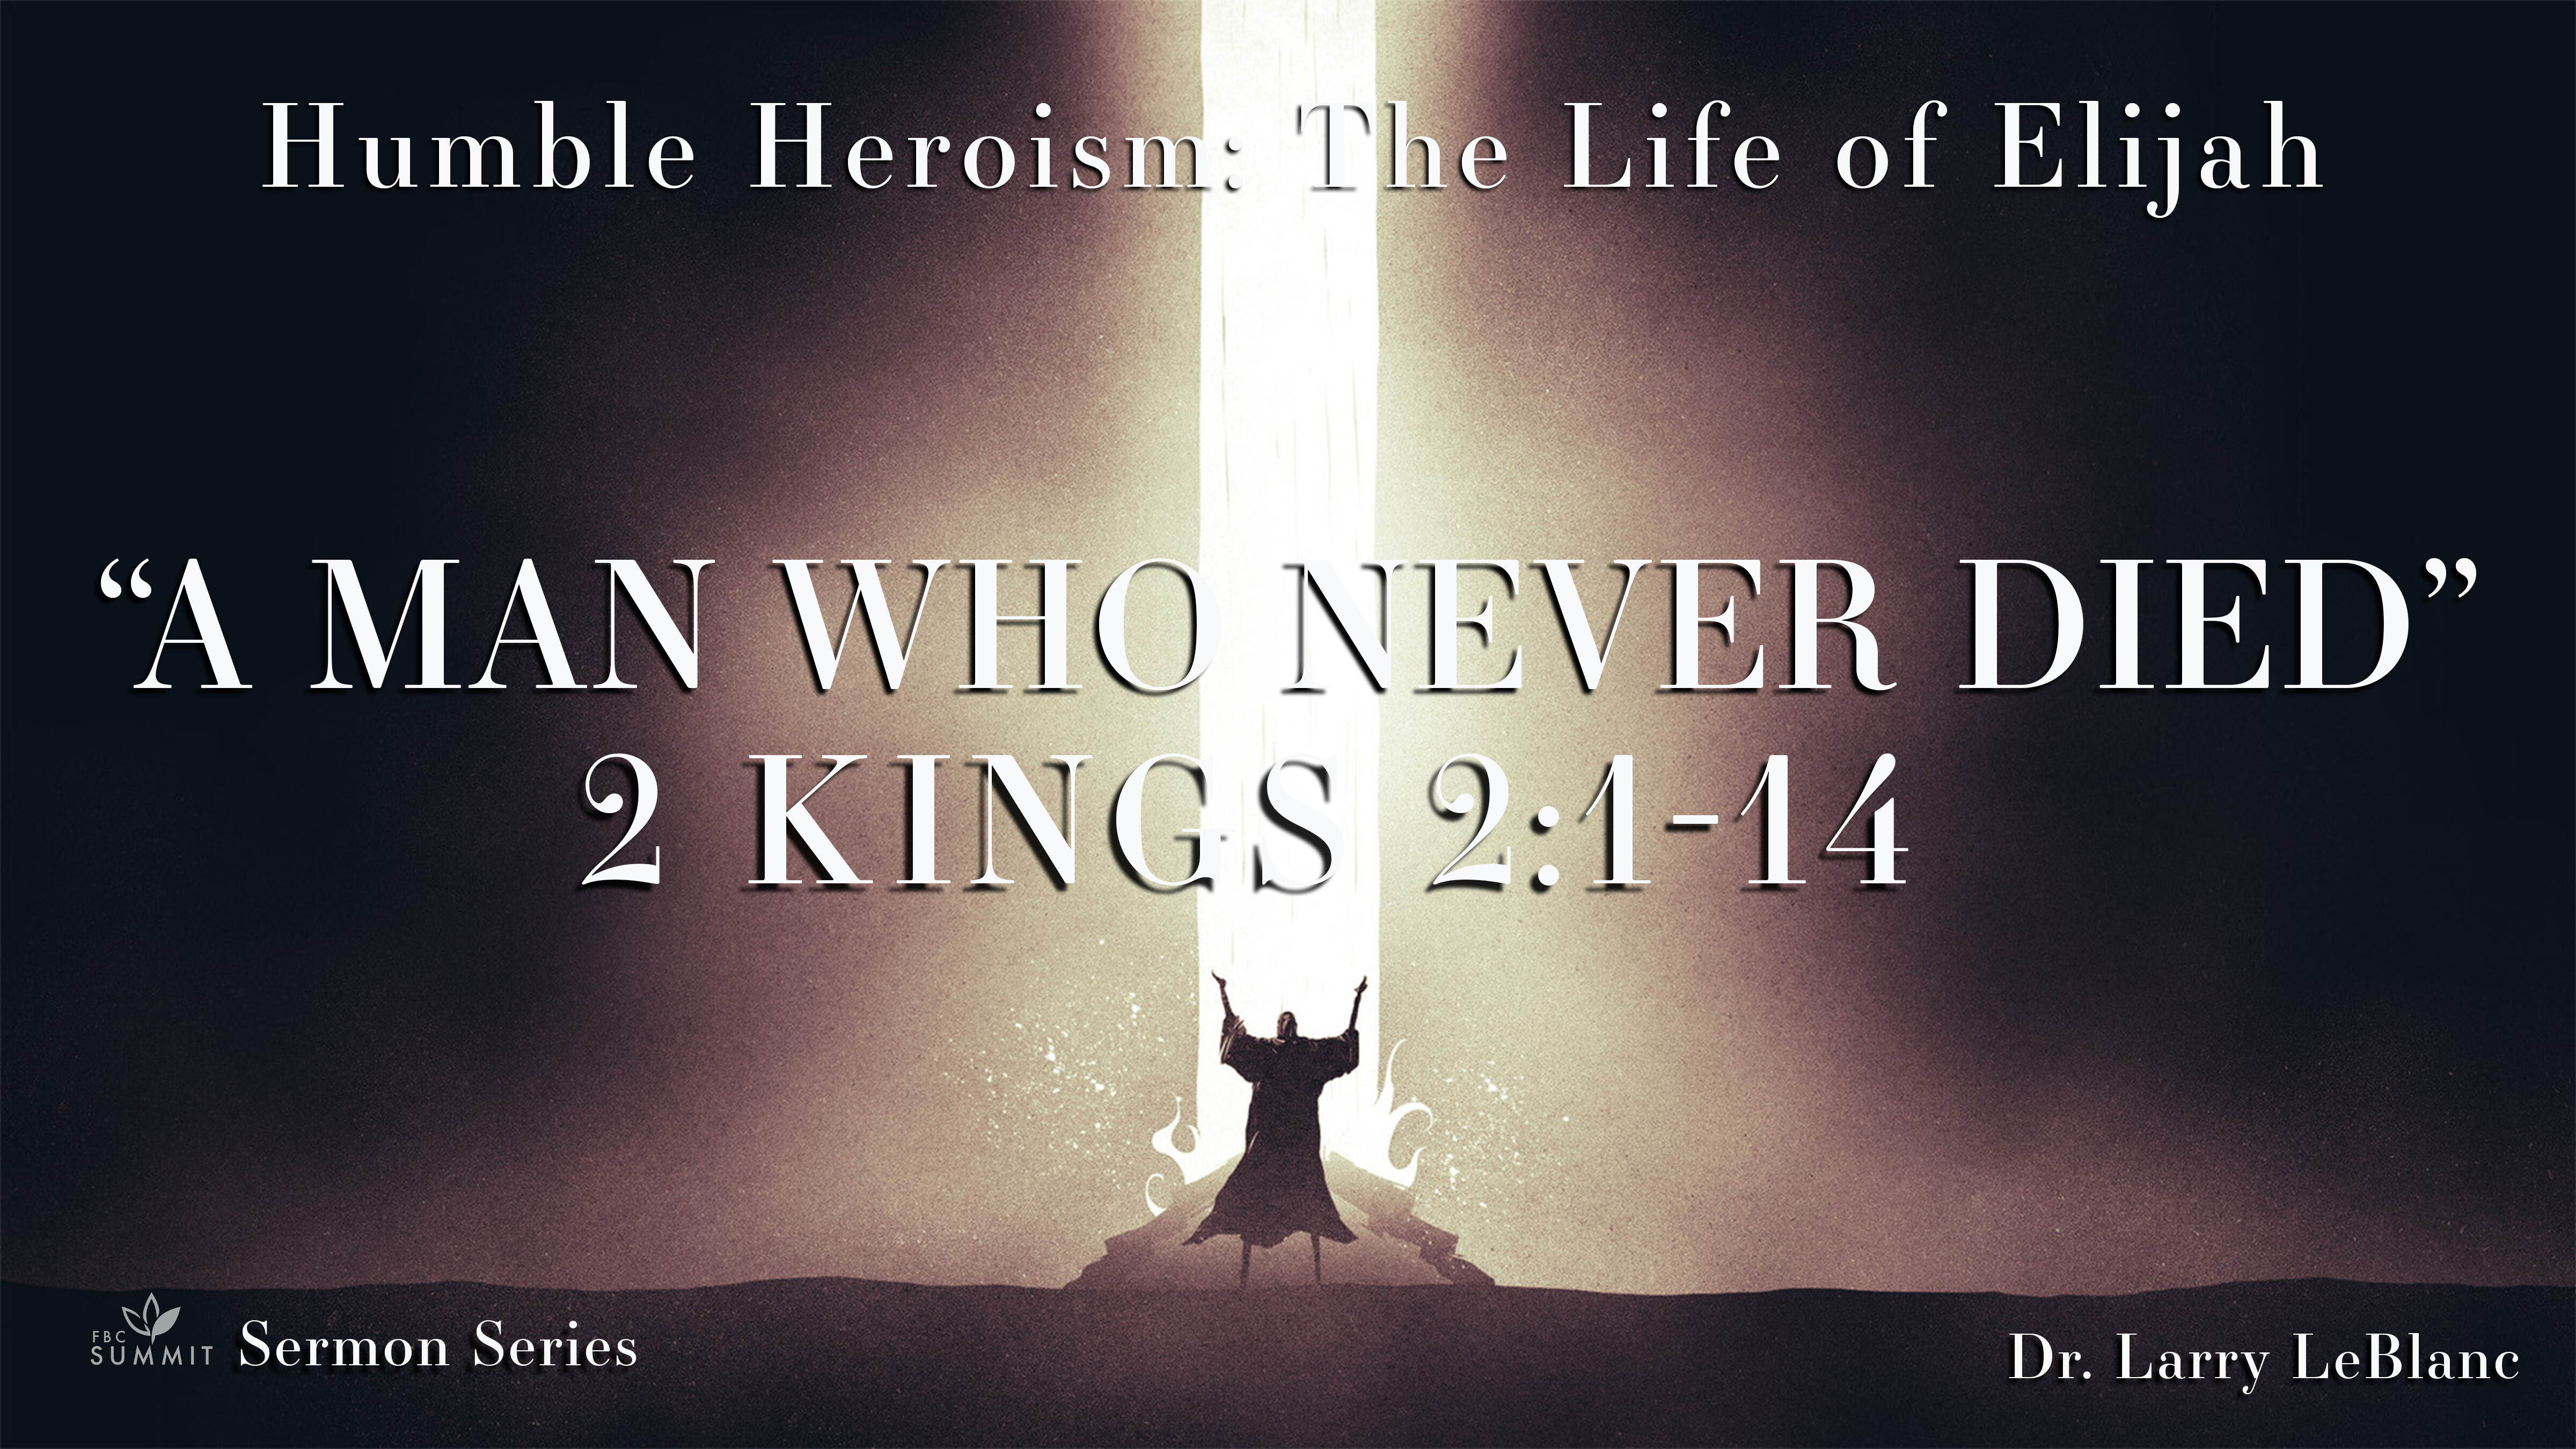 "A Man Who Never Died" 2 Kings 2:1-14 // Dr. Larry LeBlanc